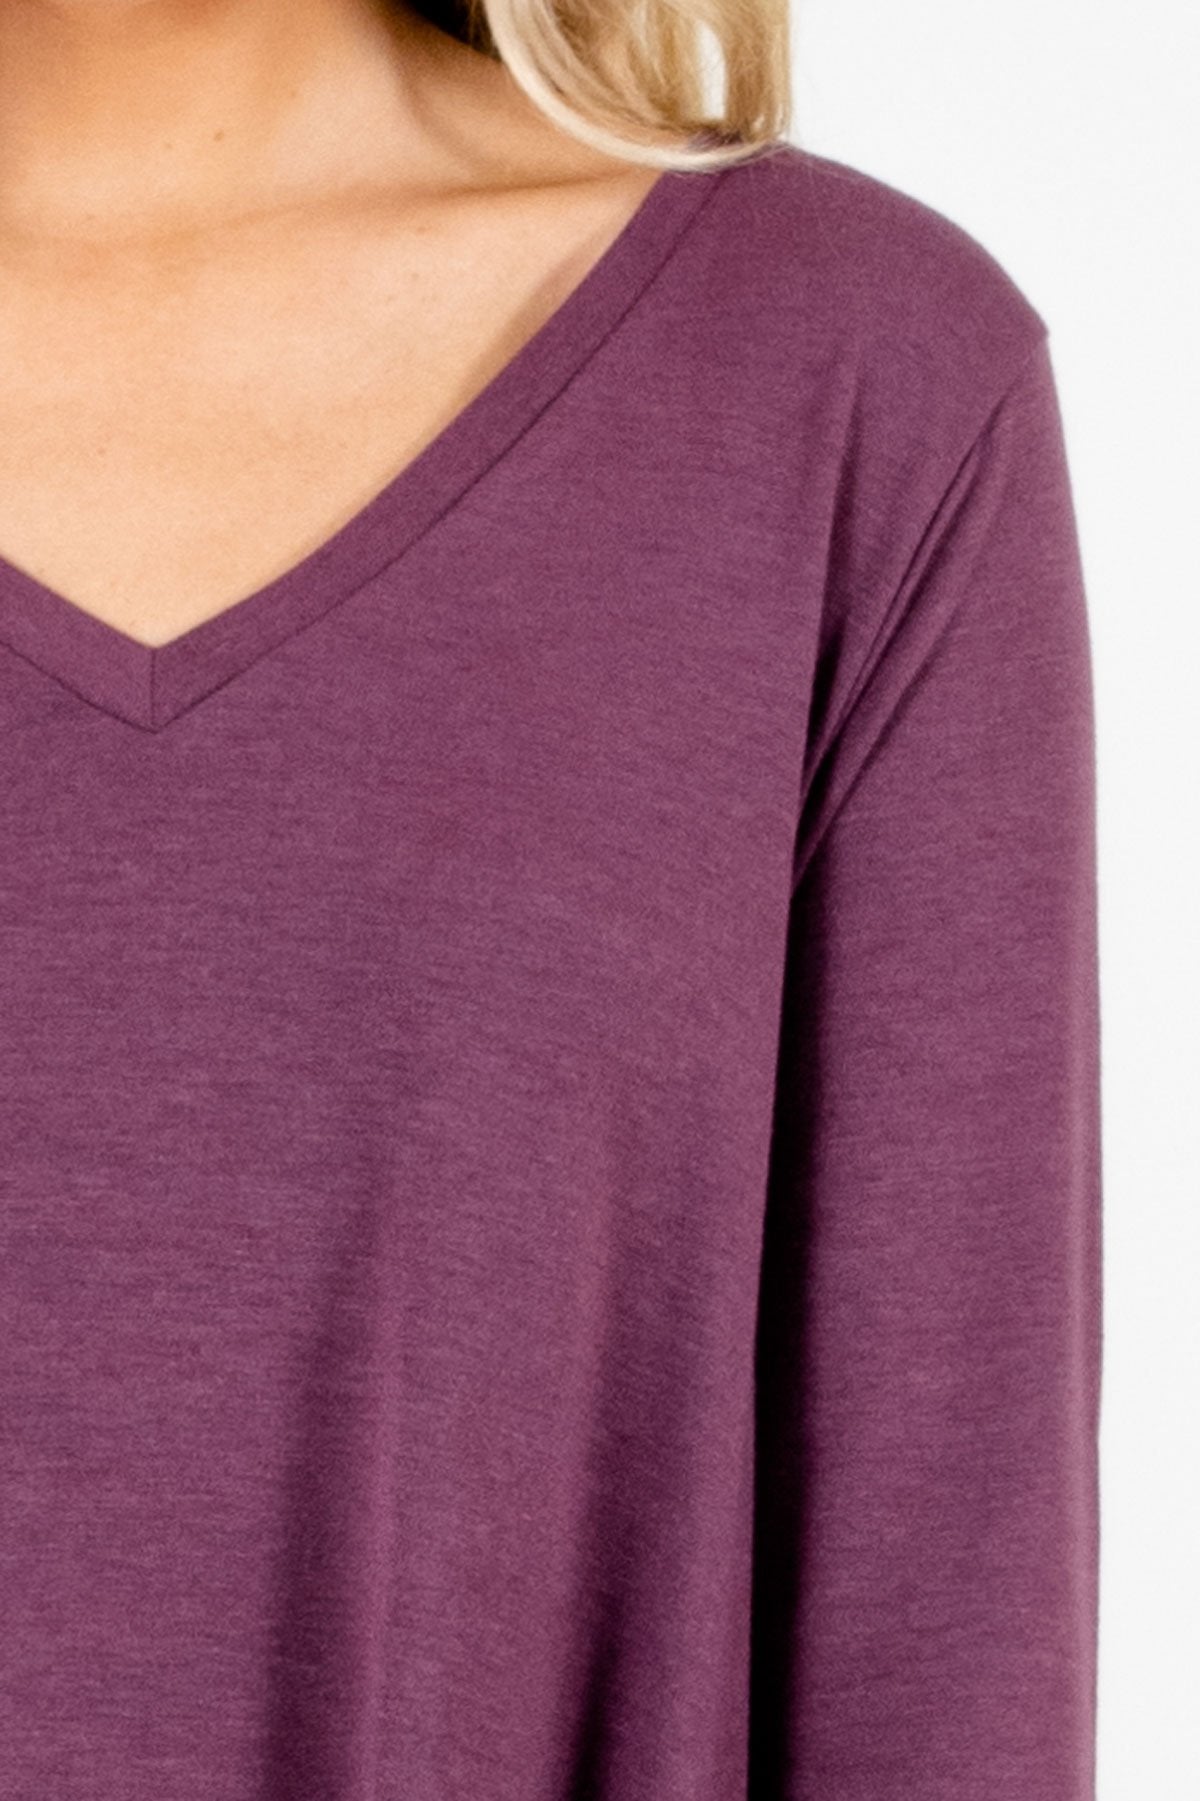 Purple Affordable Online Boutique Clothing for Women